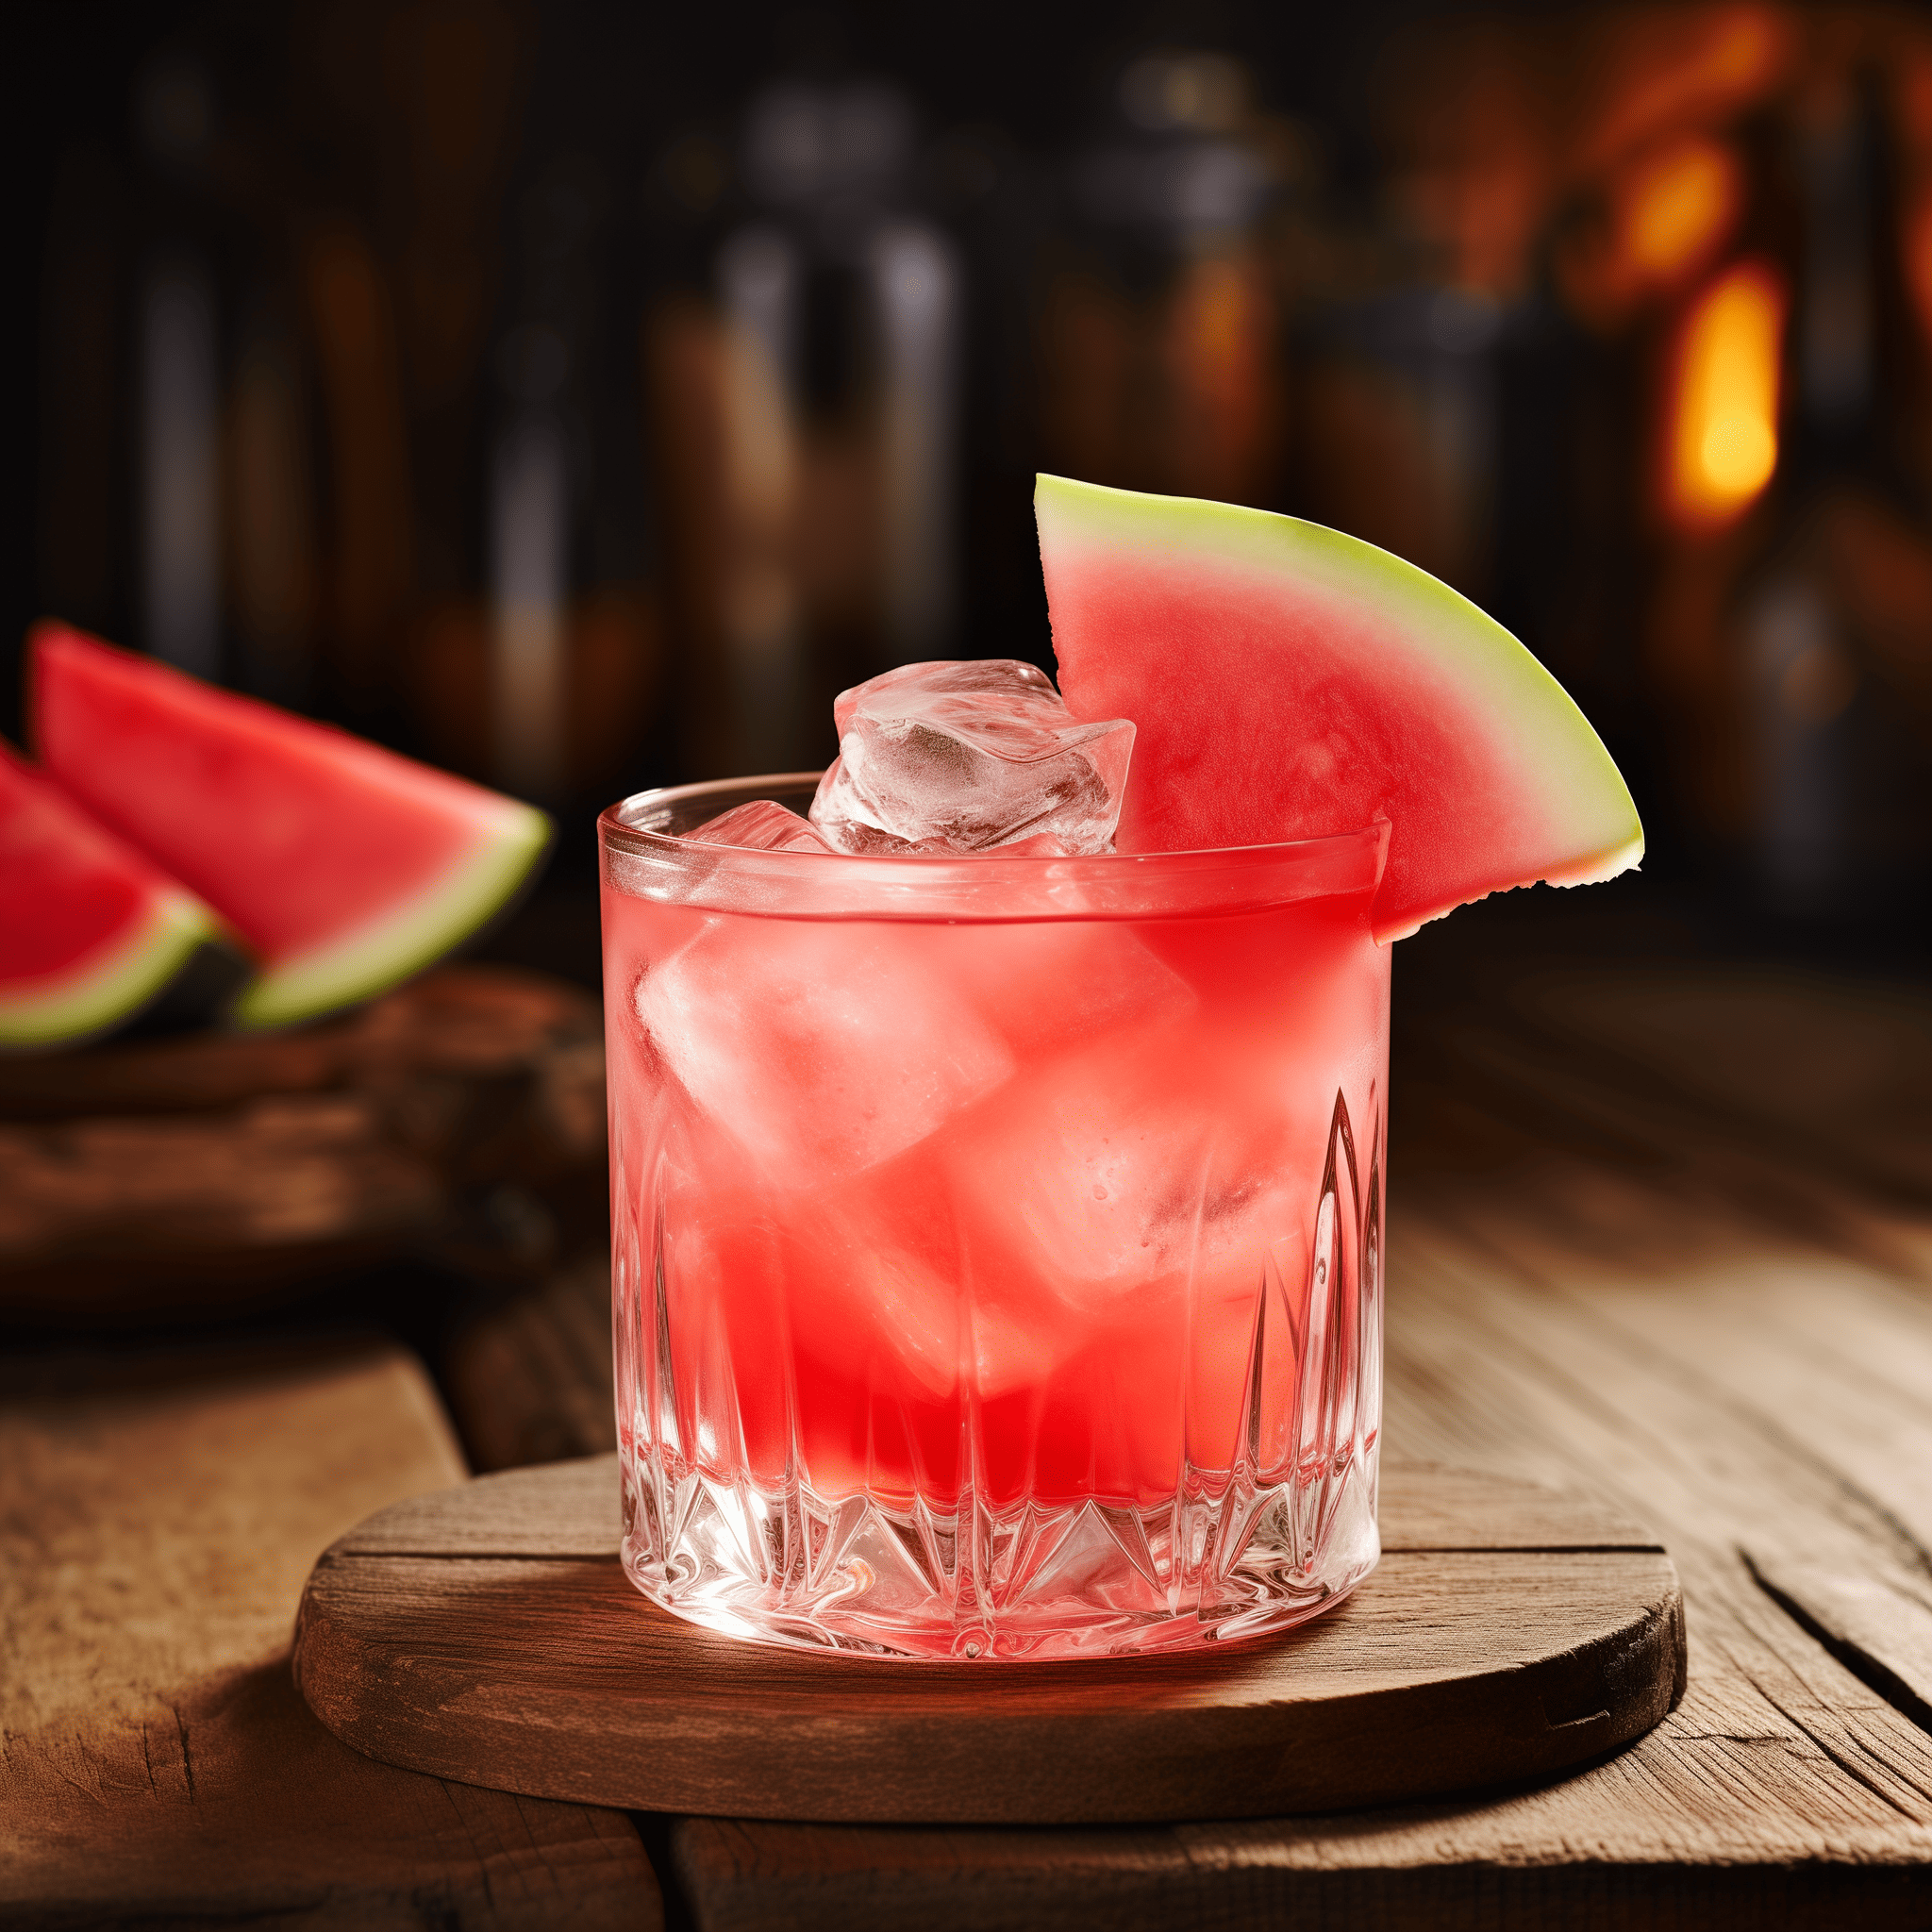 Watermelon Negroni Cocktail Recipe - The Watermelon Negroni has a harmonious balance of sweet and bitter flavors. The watermelon's natural sweetness and juiciness cut through the bitterness of the Campari, while the gin provides a botanical complexity. The sweet vermouth ties it all together with a smooth, herbal finish.